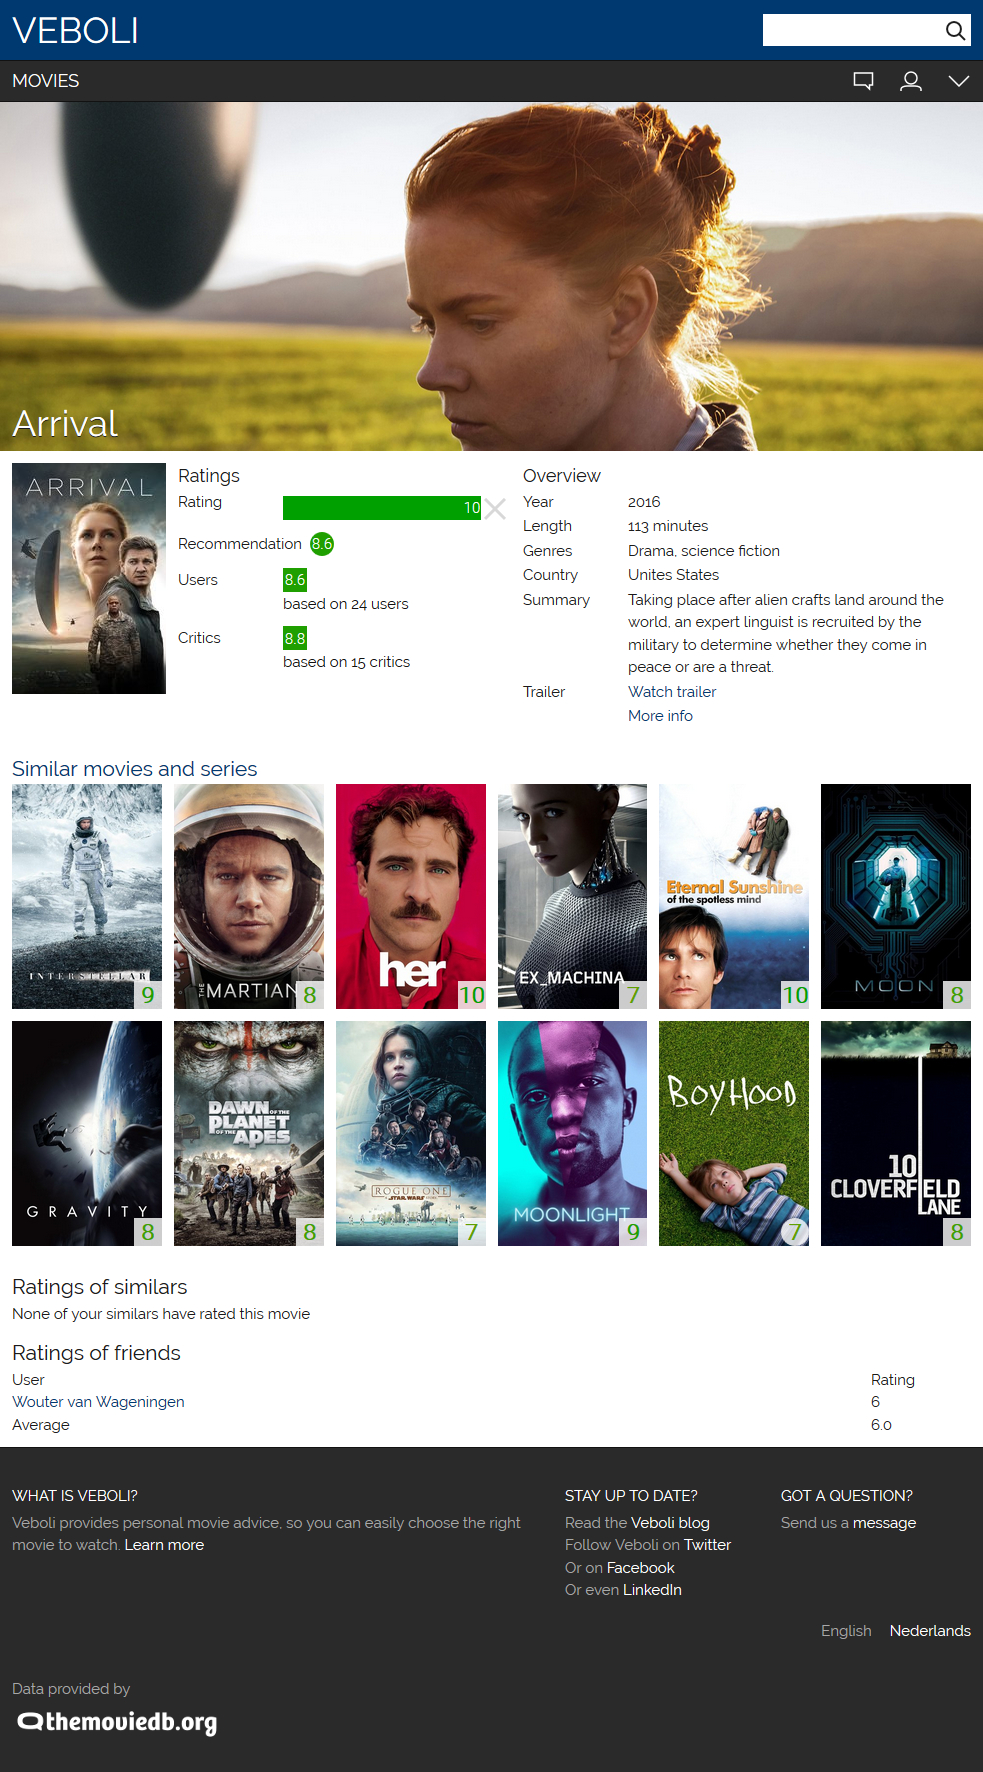 Design 8: screenshot of the old movie page for Arrival where the background is white.